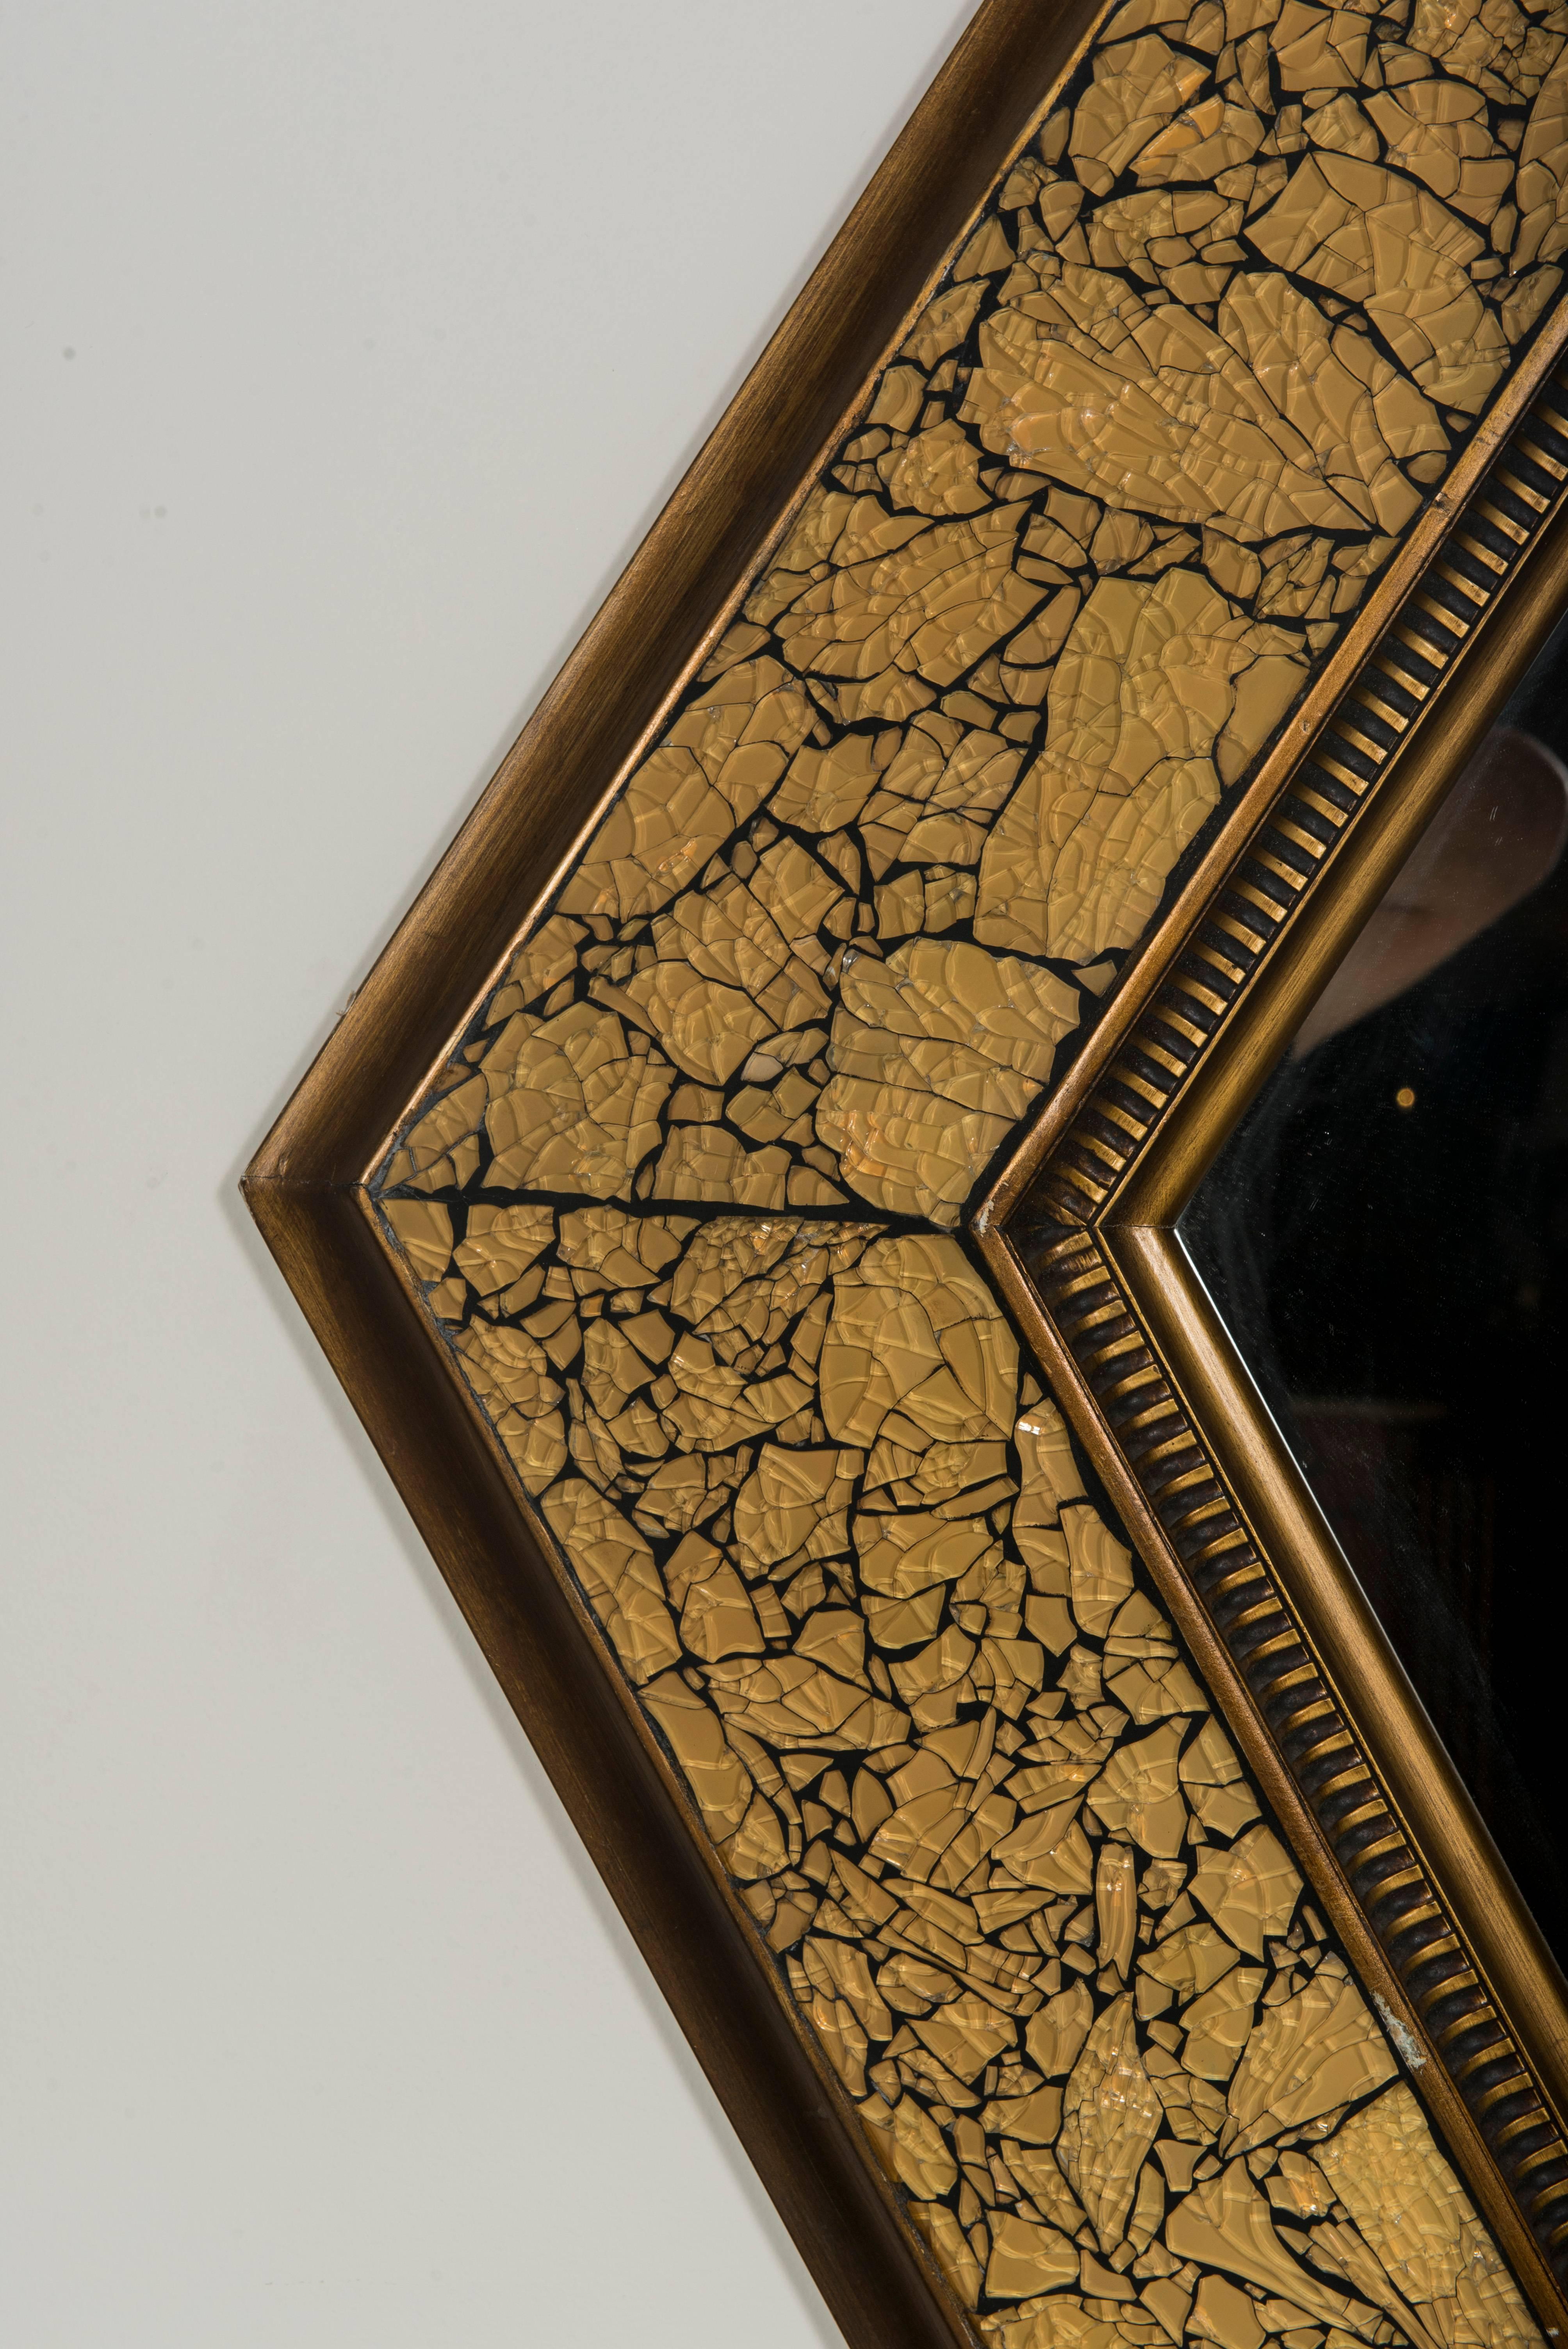 A midcentury diamond shape mirror with decorative crackled gold frame.